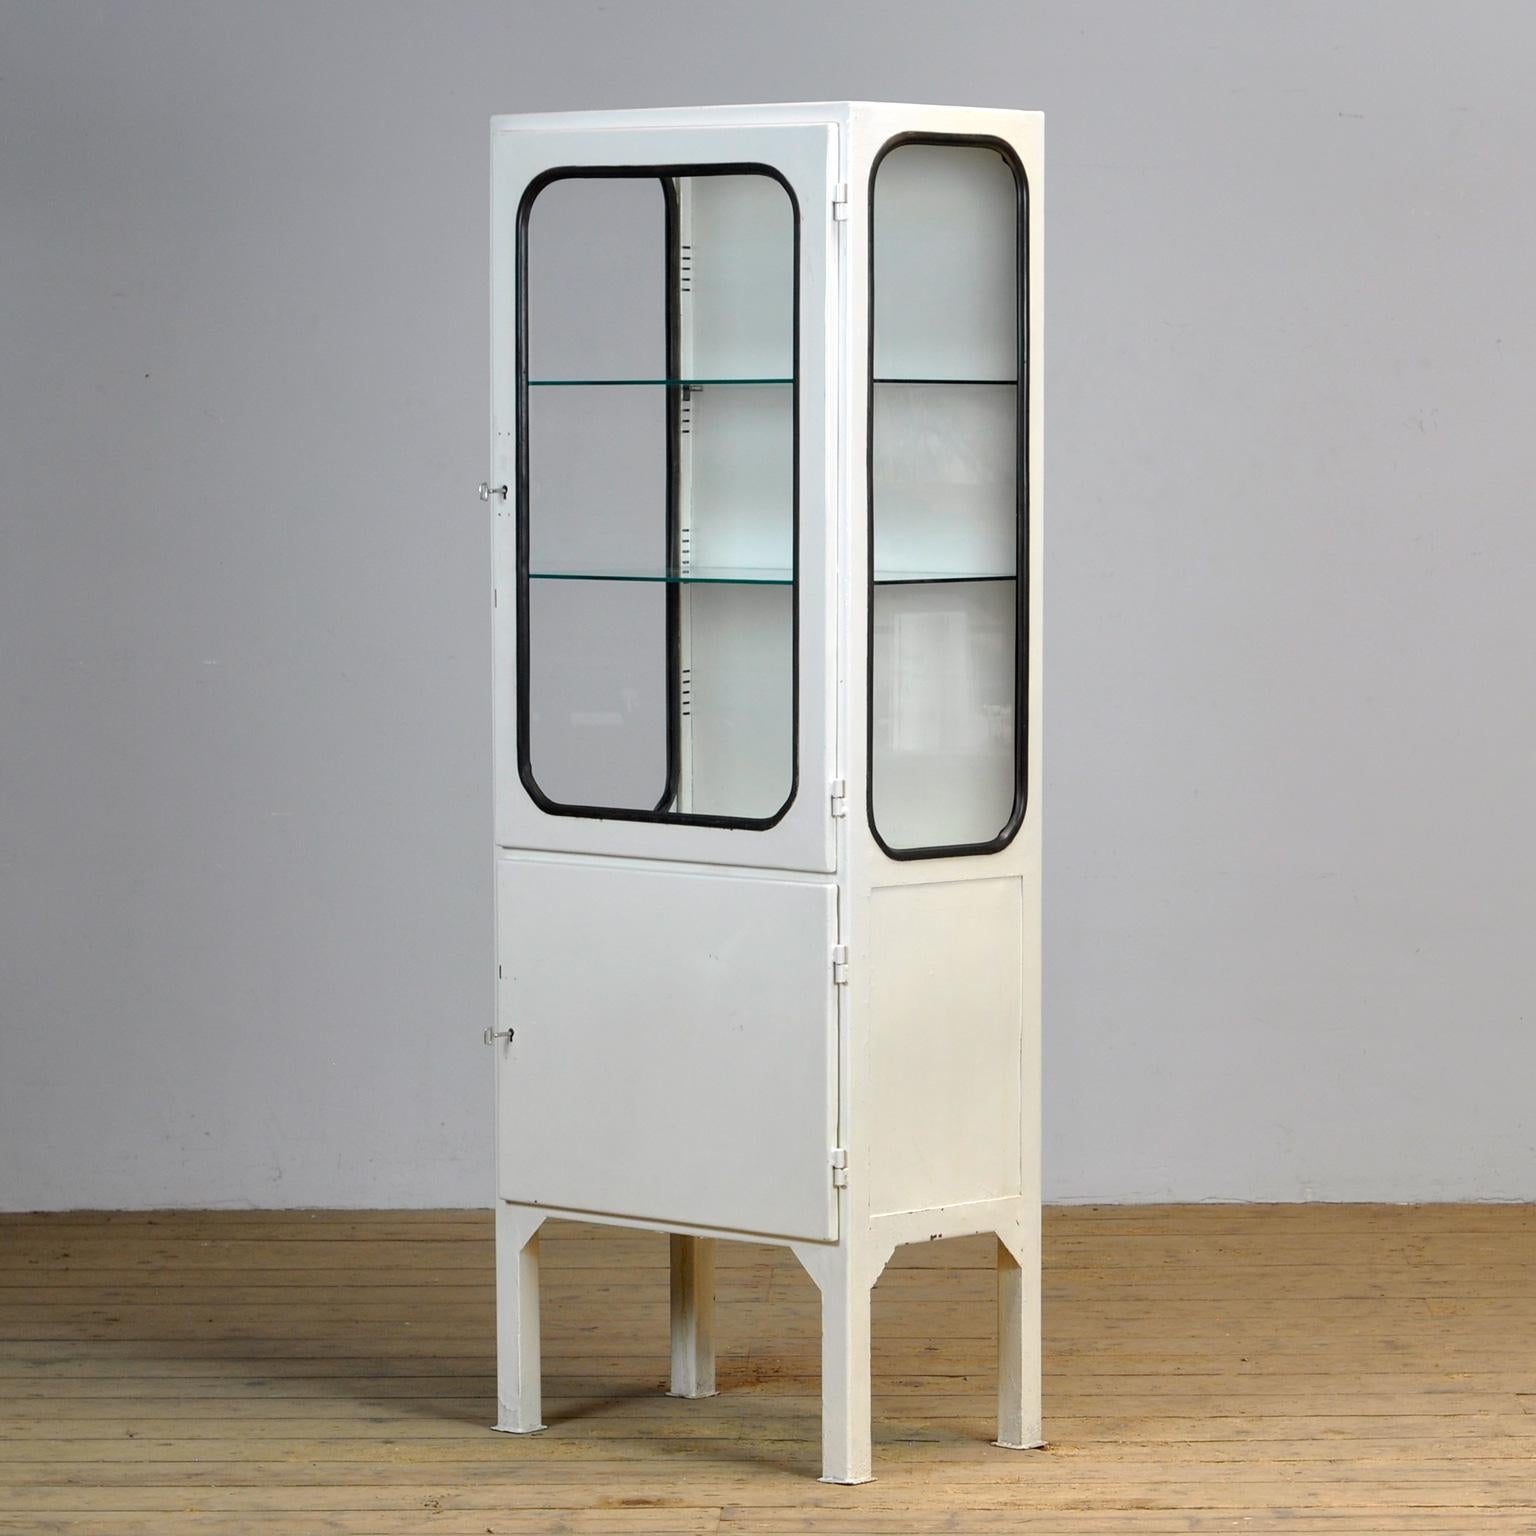 Hungarian Vintage Iron And Glass Medical Cabinet, 1970’s For Sale